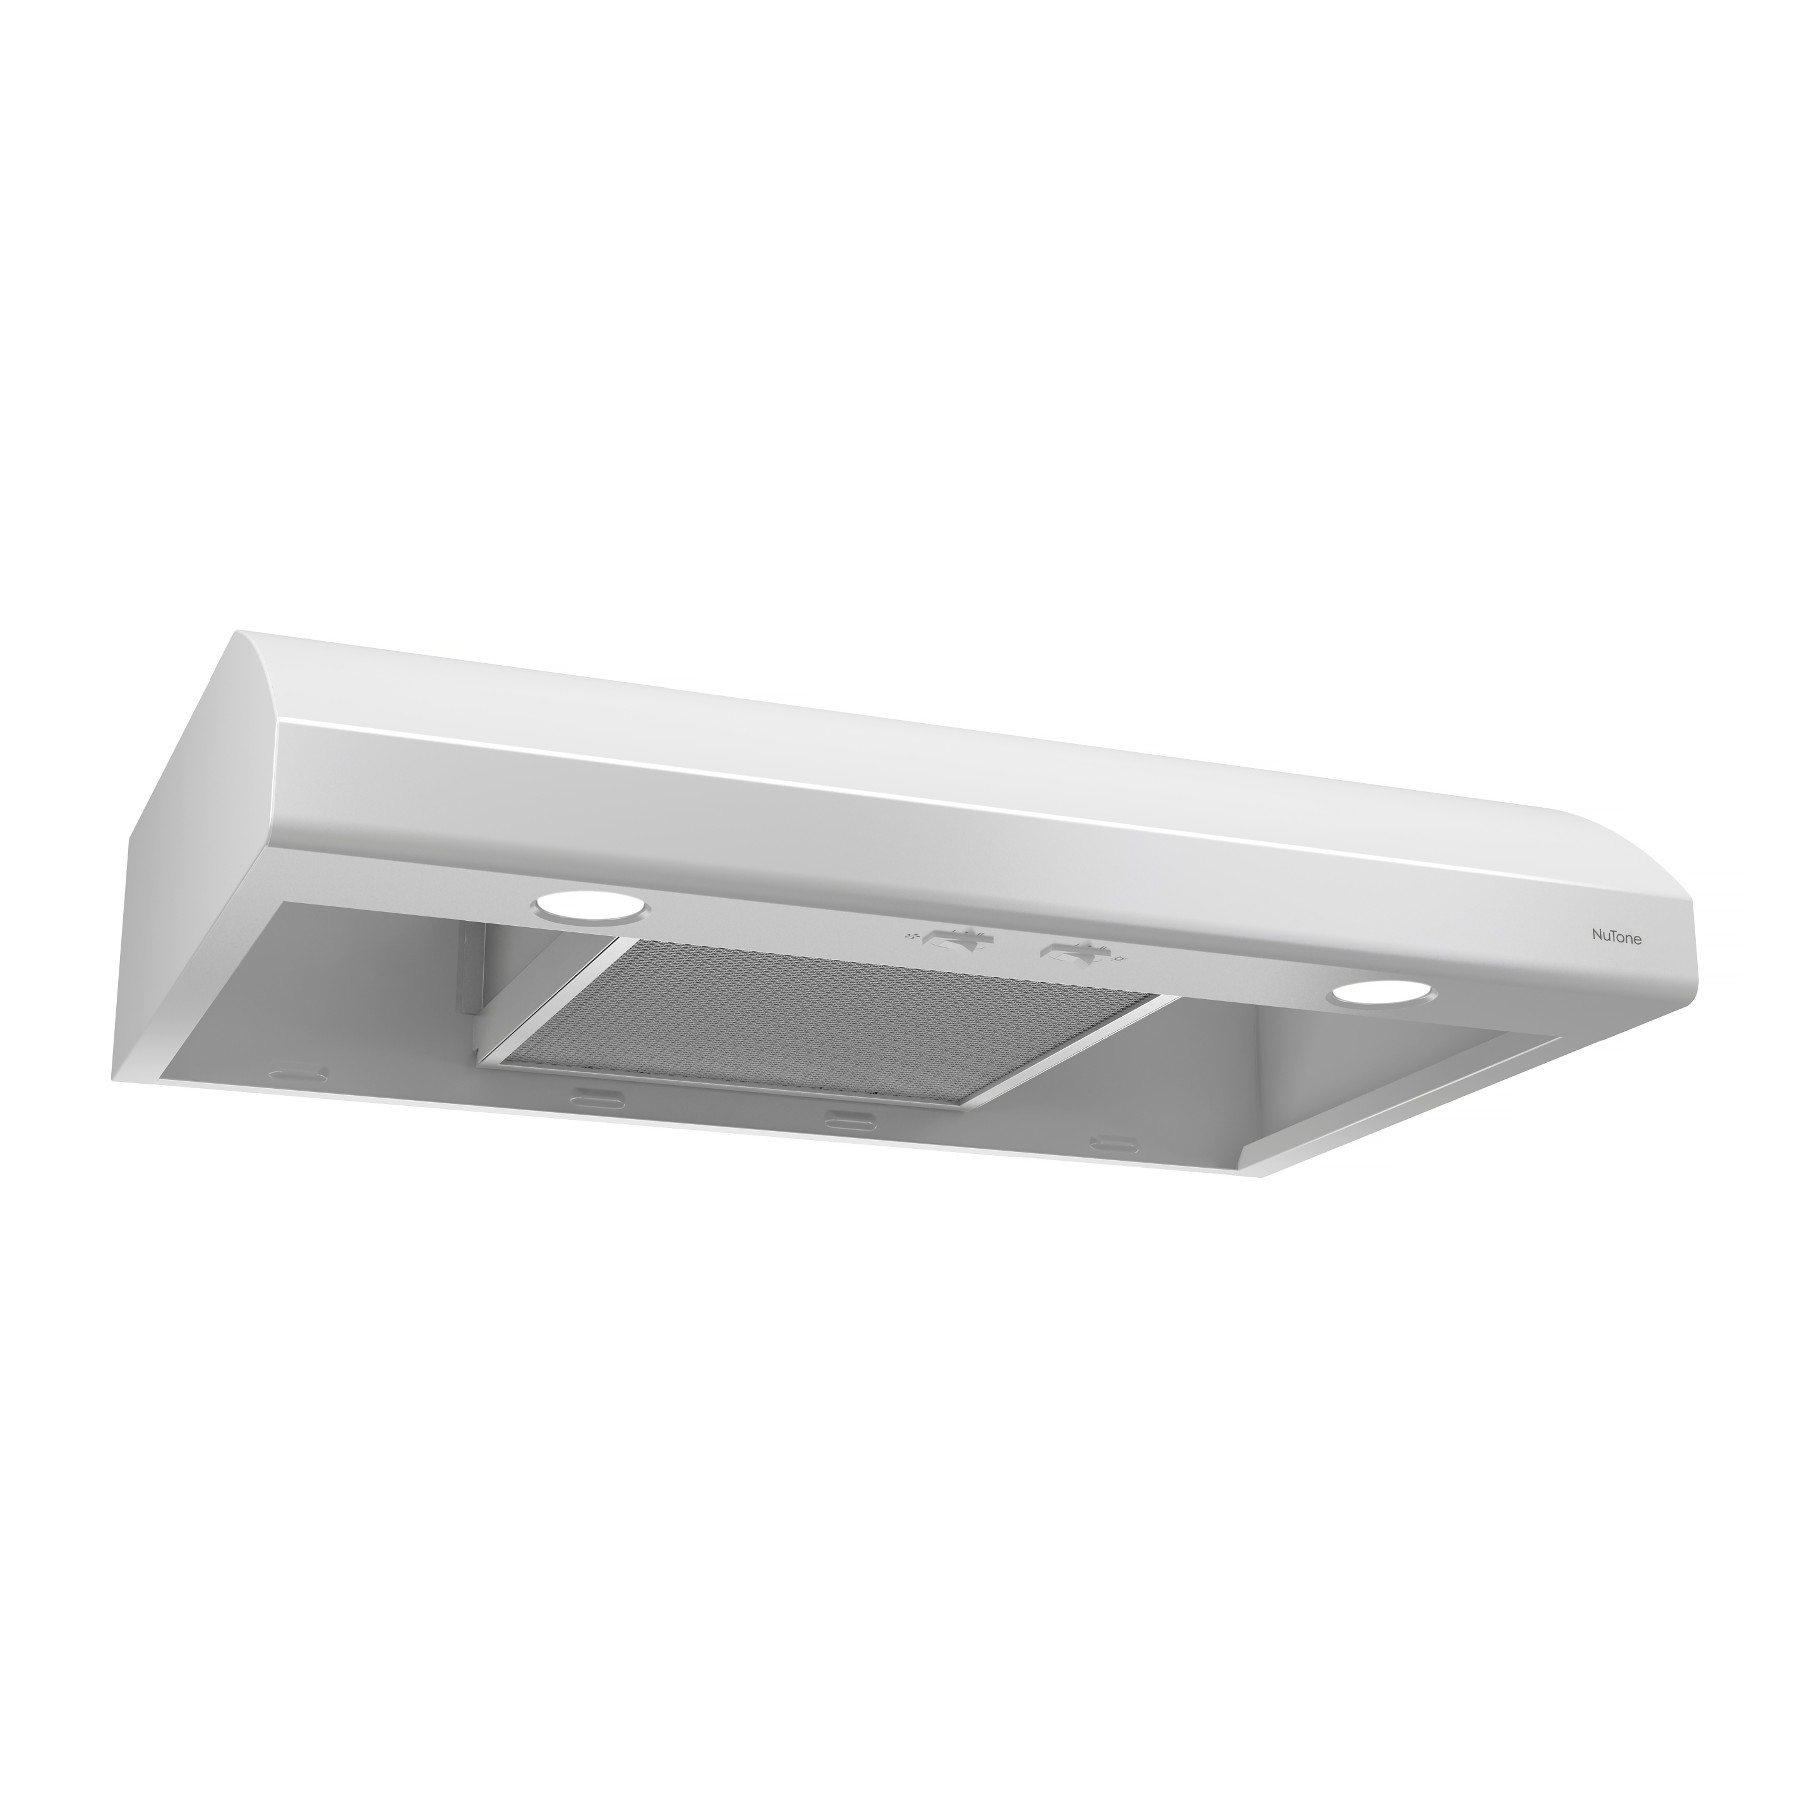 **DISCONTINUED** NuTone® 30-Inch Convertible Under-Cabinet Range Hood, 250 CFM, White